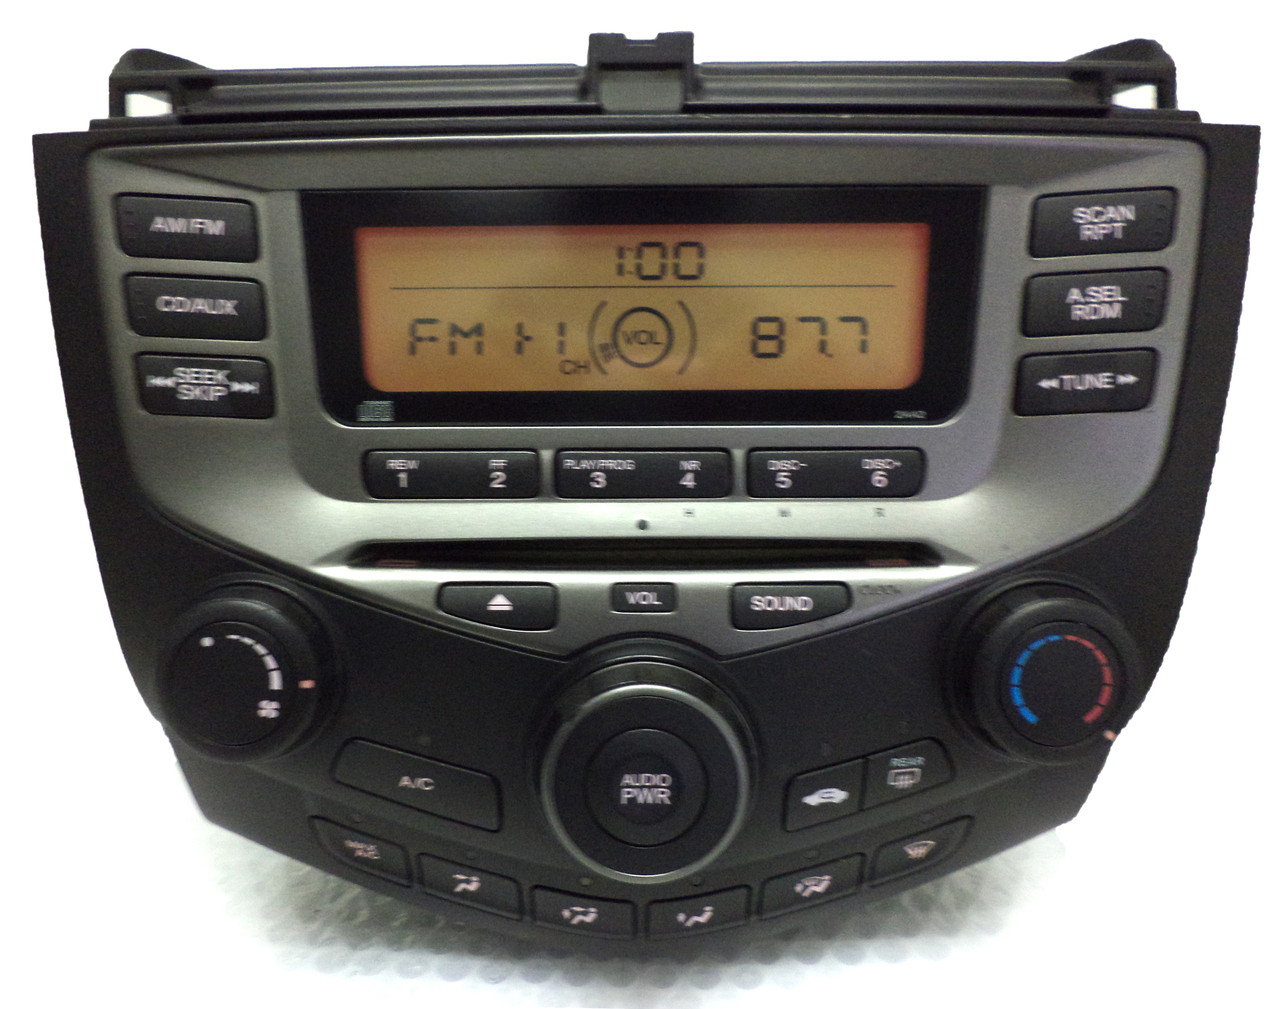 Honda Accord Radio A Comprehensive Guide to Features, Troubleshooting